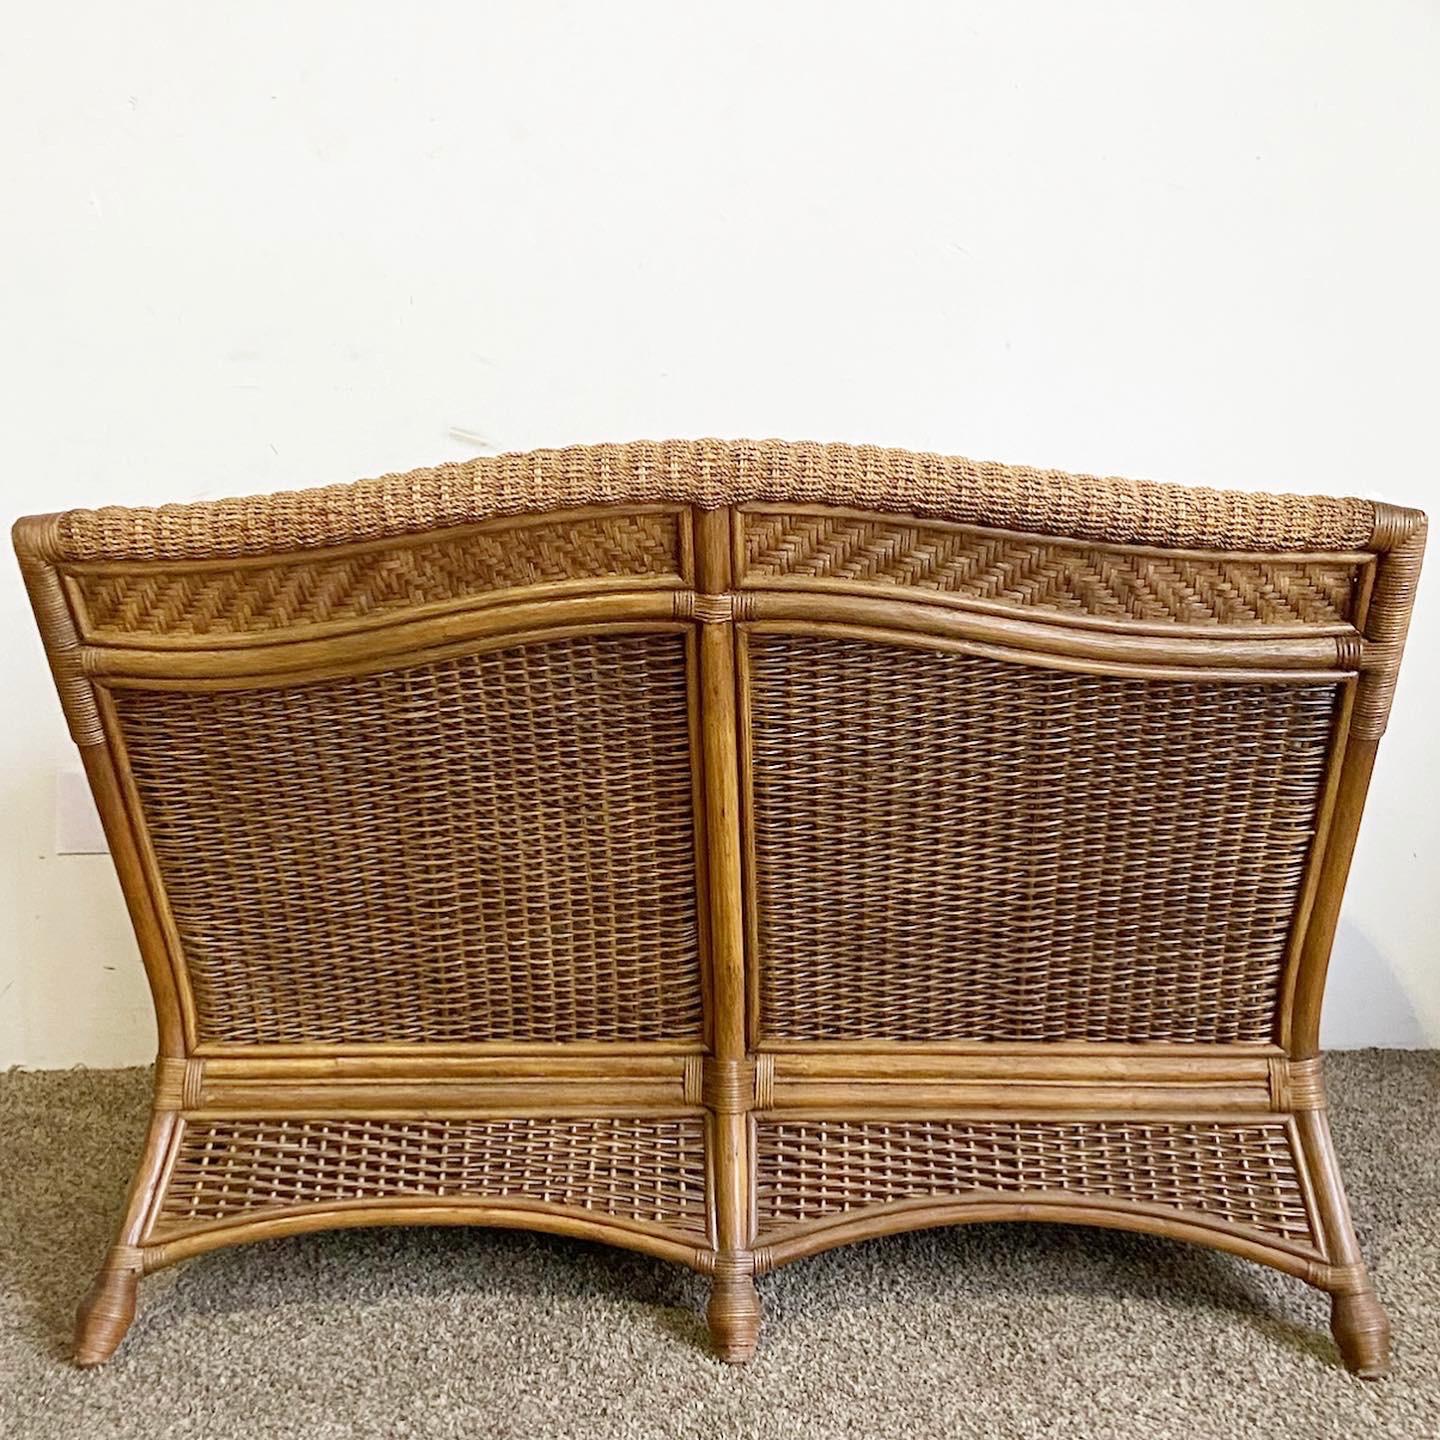 Boho Chic Bamboo Rattan Wicker Love Seat With Cushions In Good Condition For Sale In Delray Beach, FL